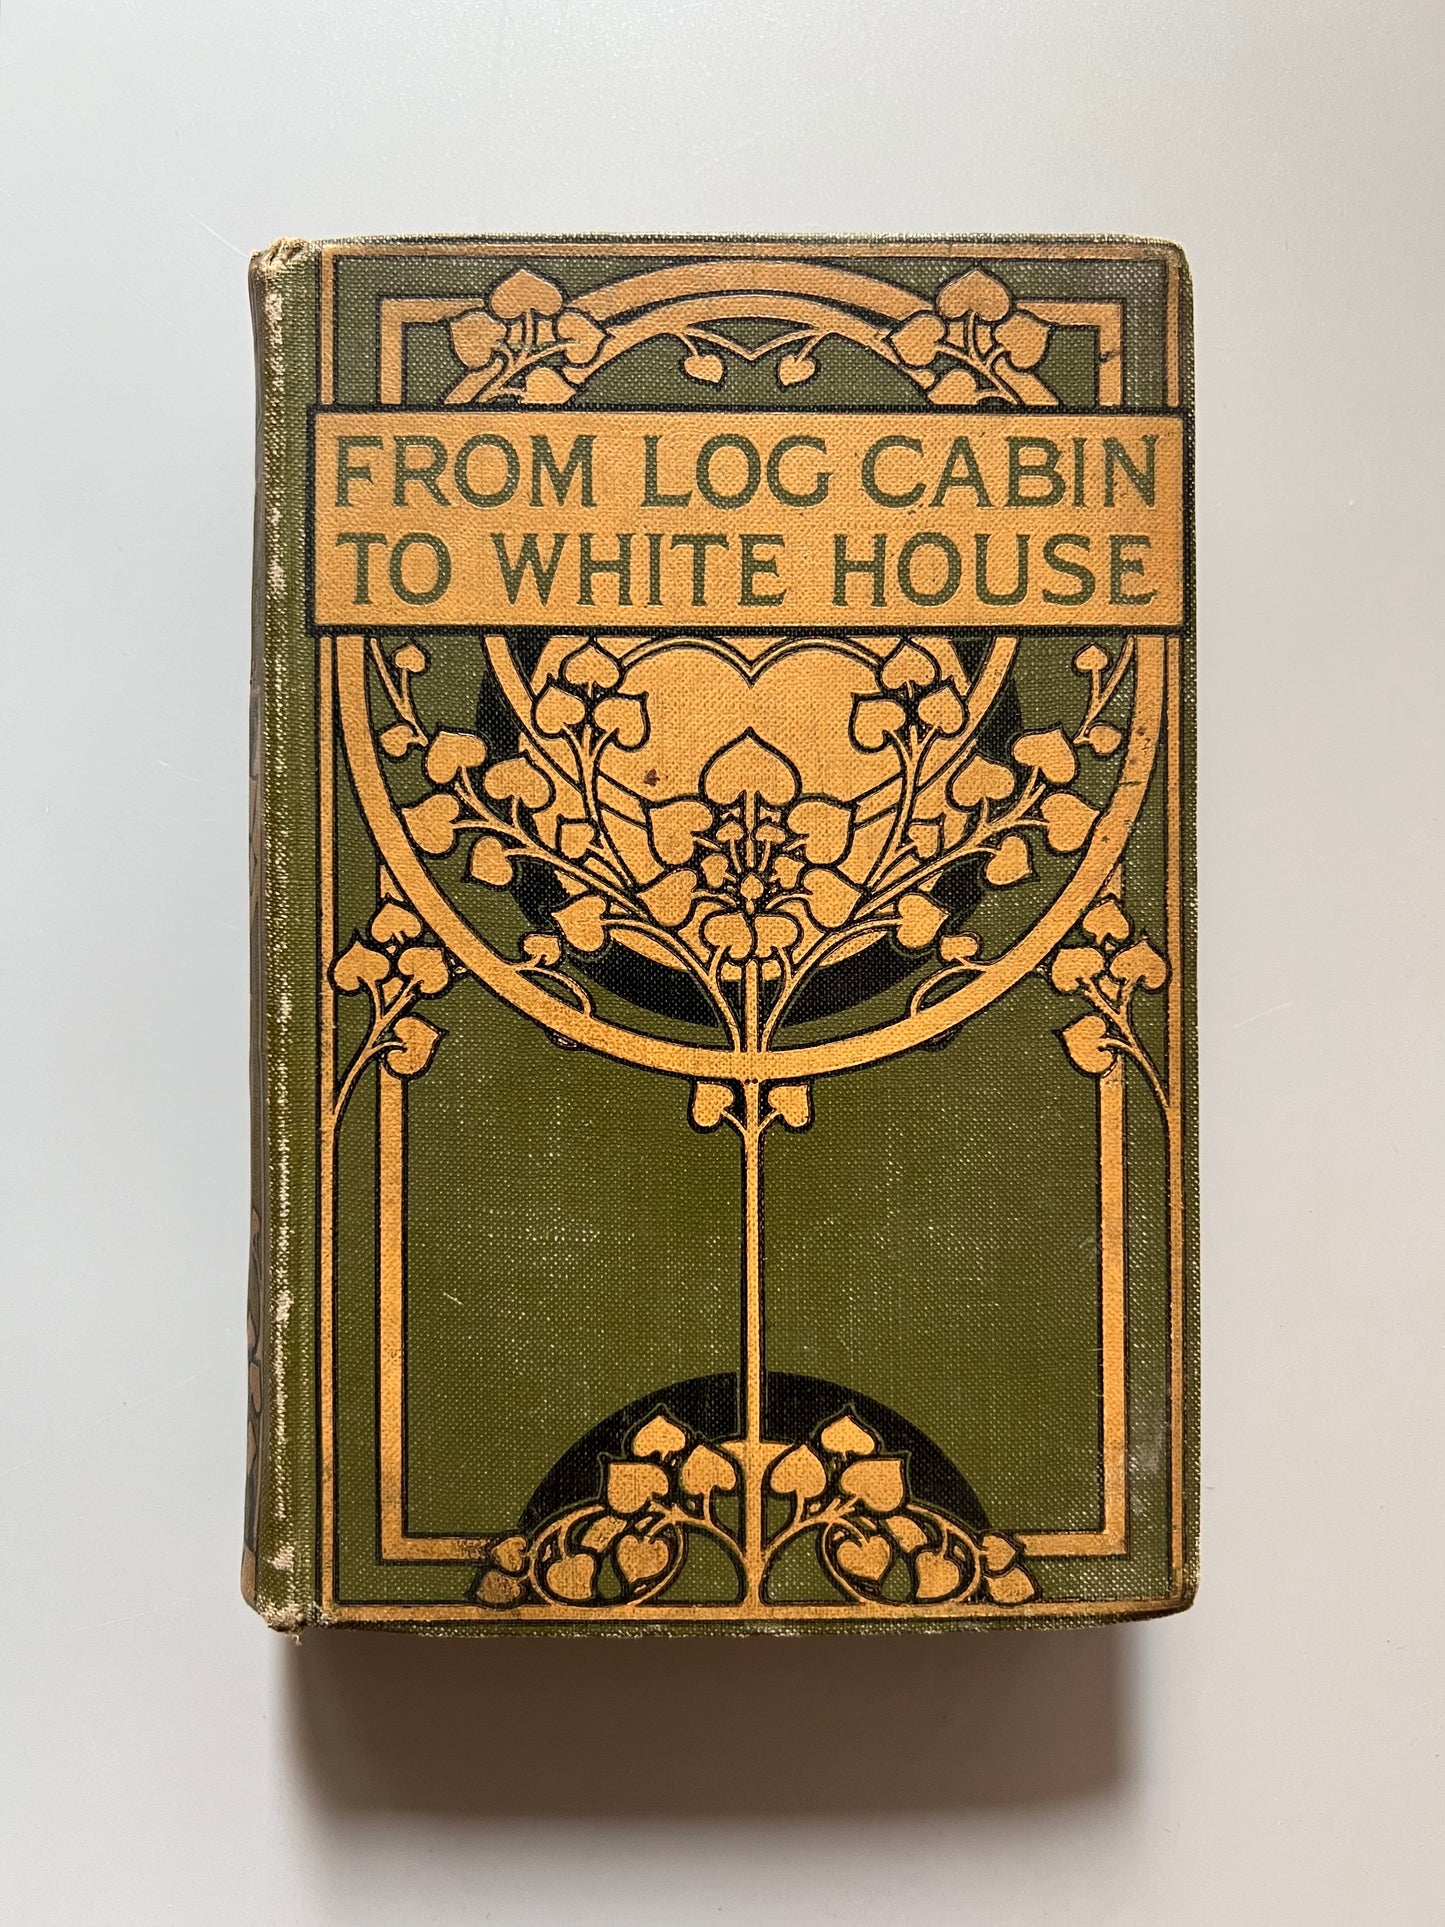 From log-cabin to the White house, William M. Thayer - Charles H. Kelly, ca. 1900